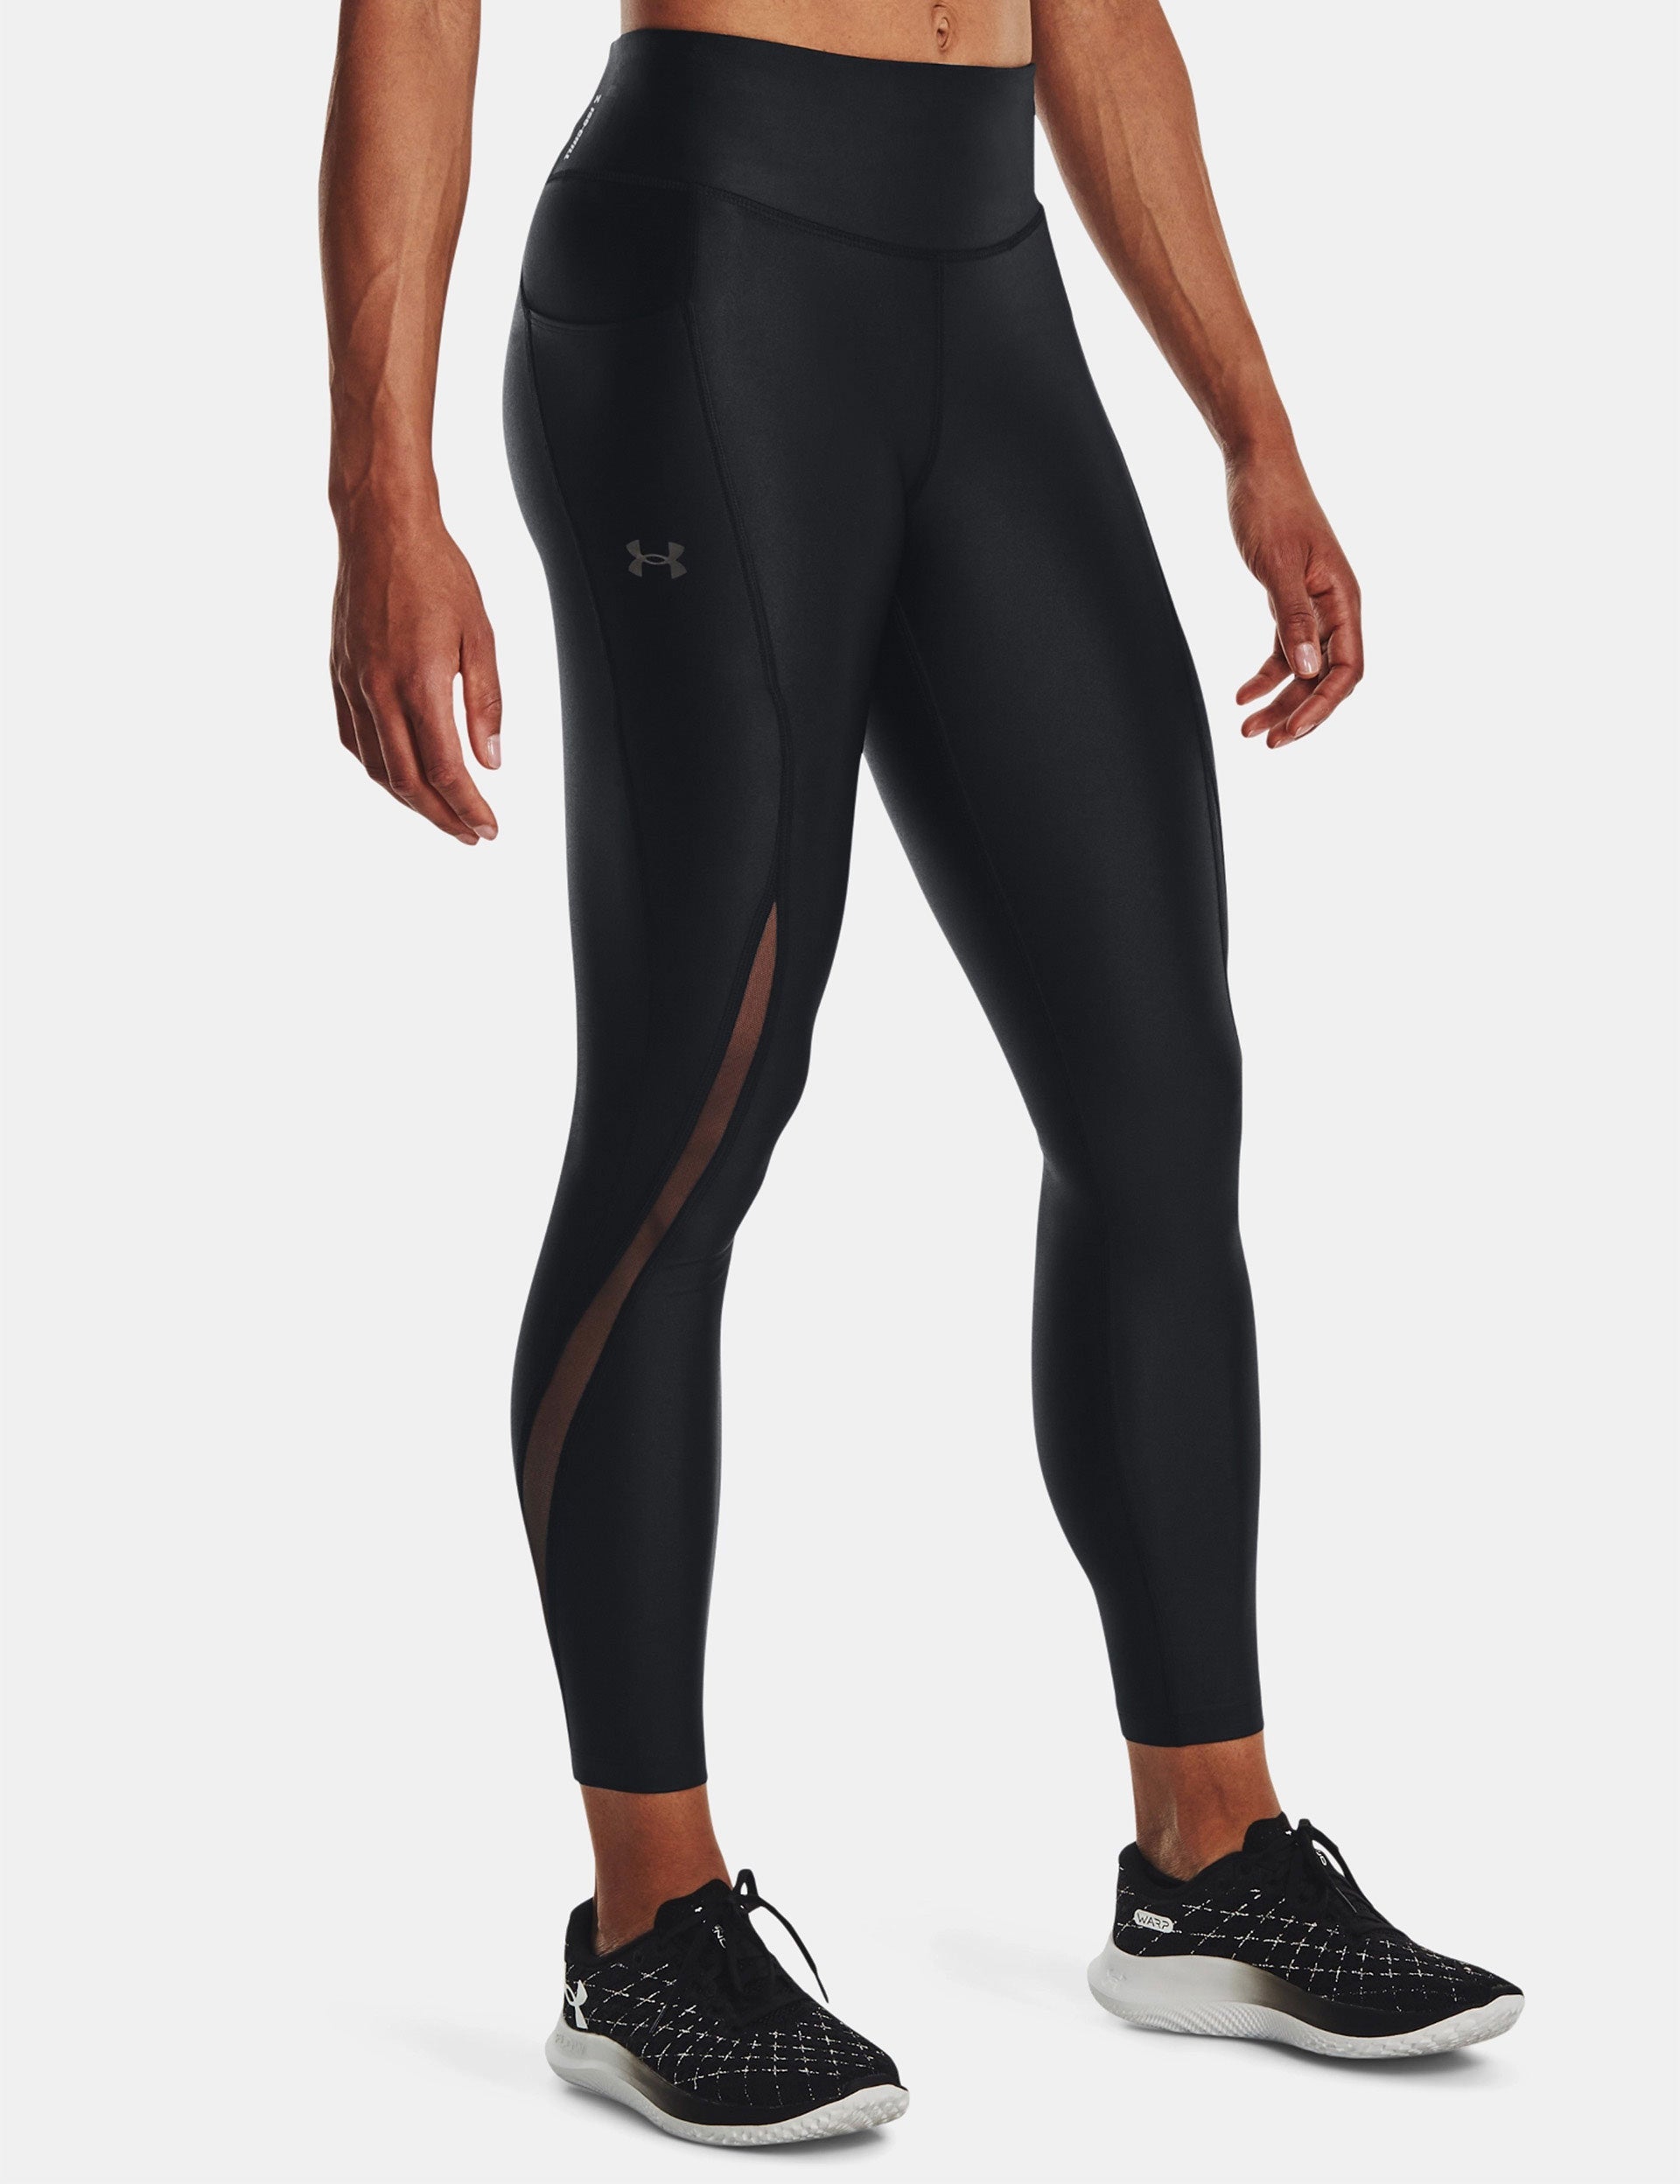 Under Armour Iso-Chill Compression Leggings Black 1365226-001 at